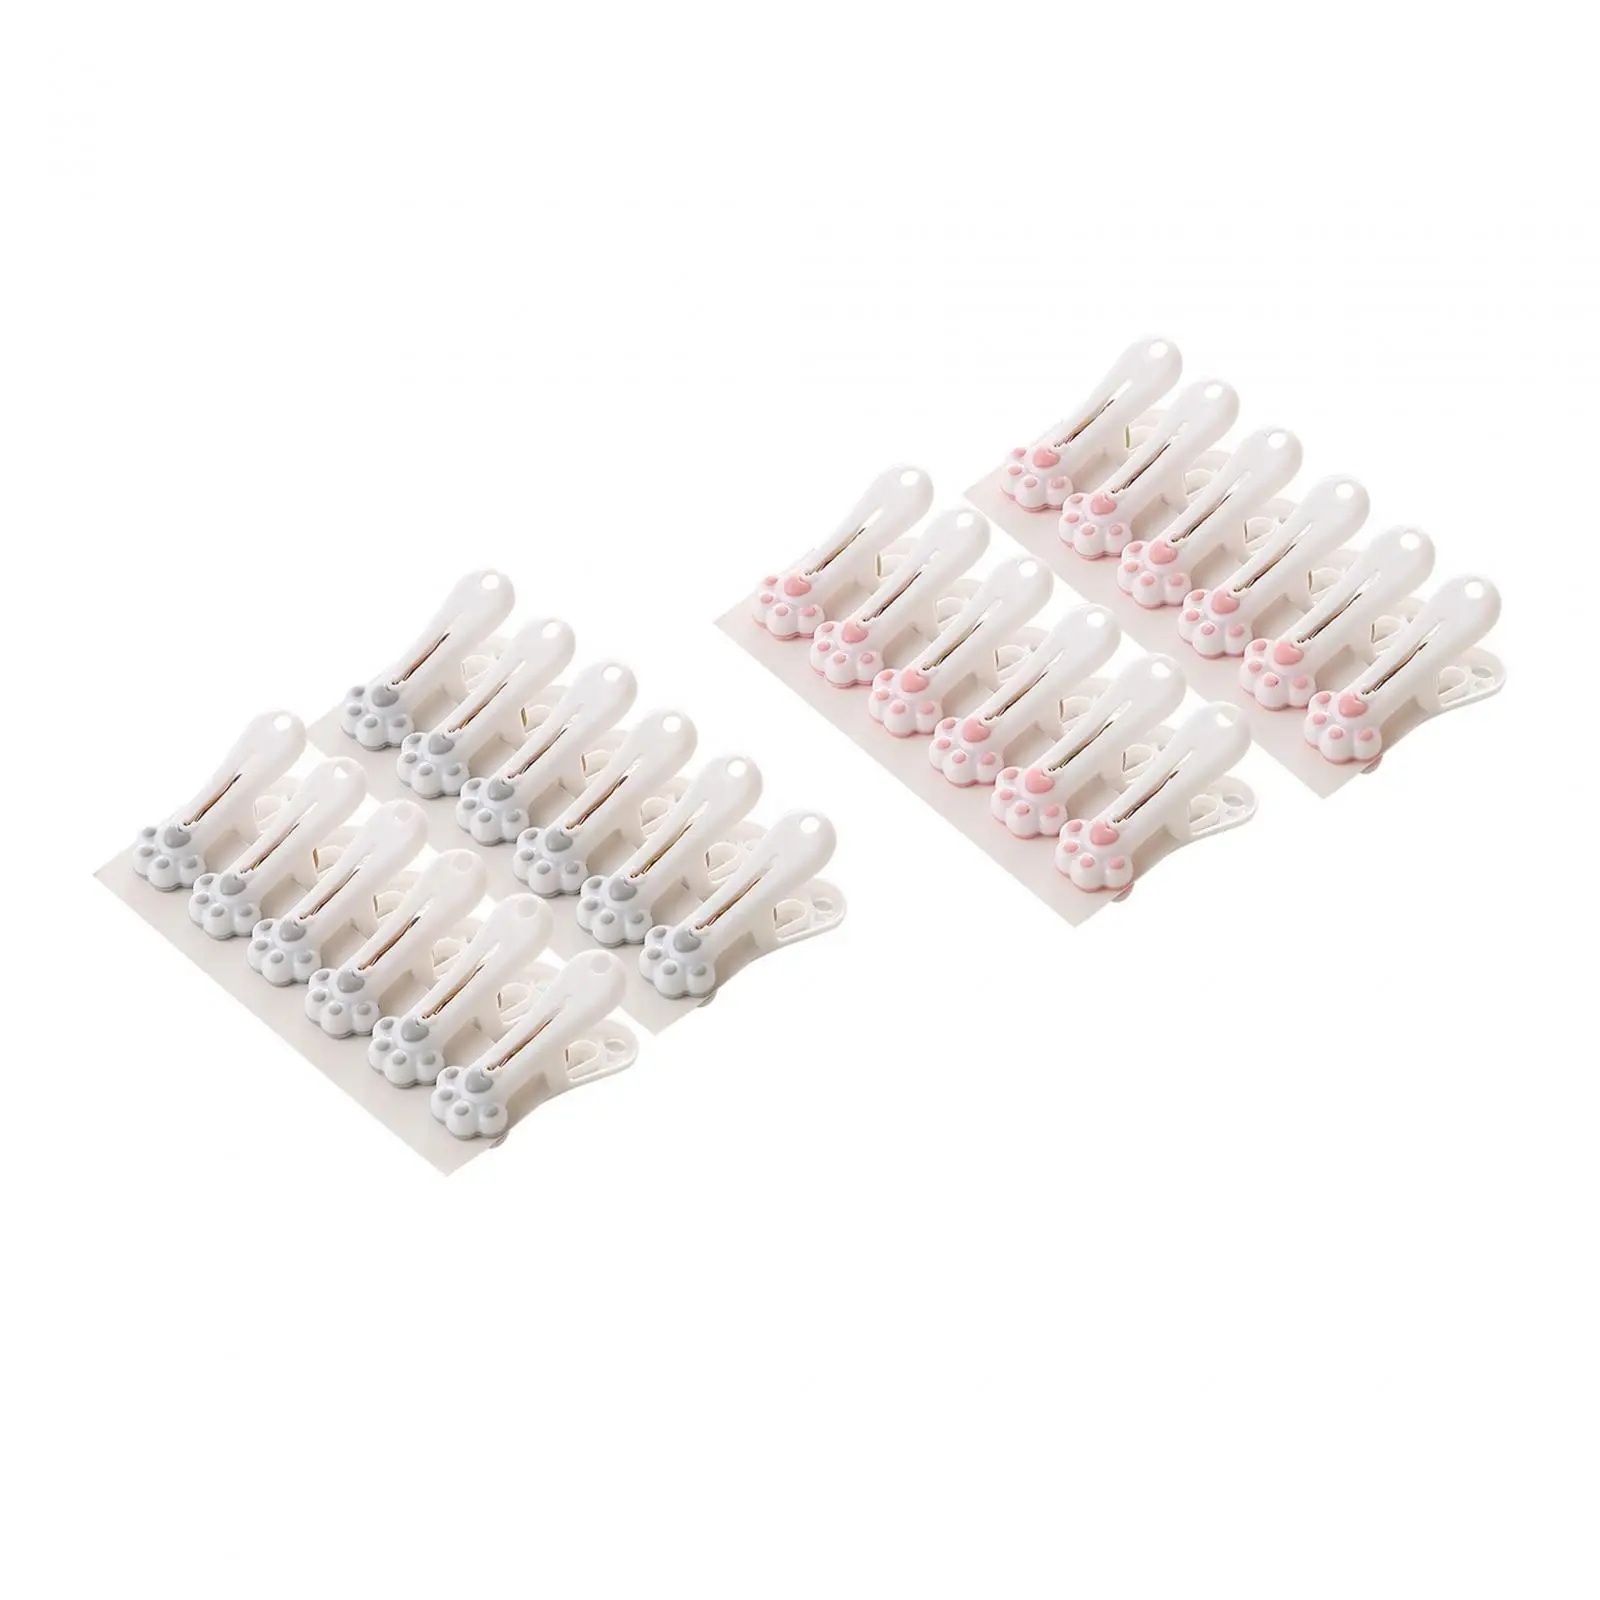 12Pcs Clothespins Cute Clothes Drying Rack Stable Underwear Hangers Sock Hangers Clothes Pins for Underwear Trouser Girls Women